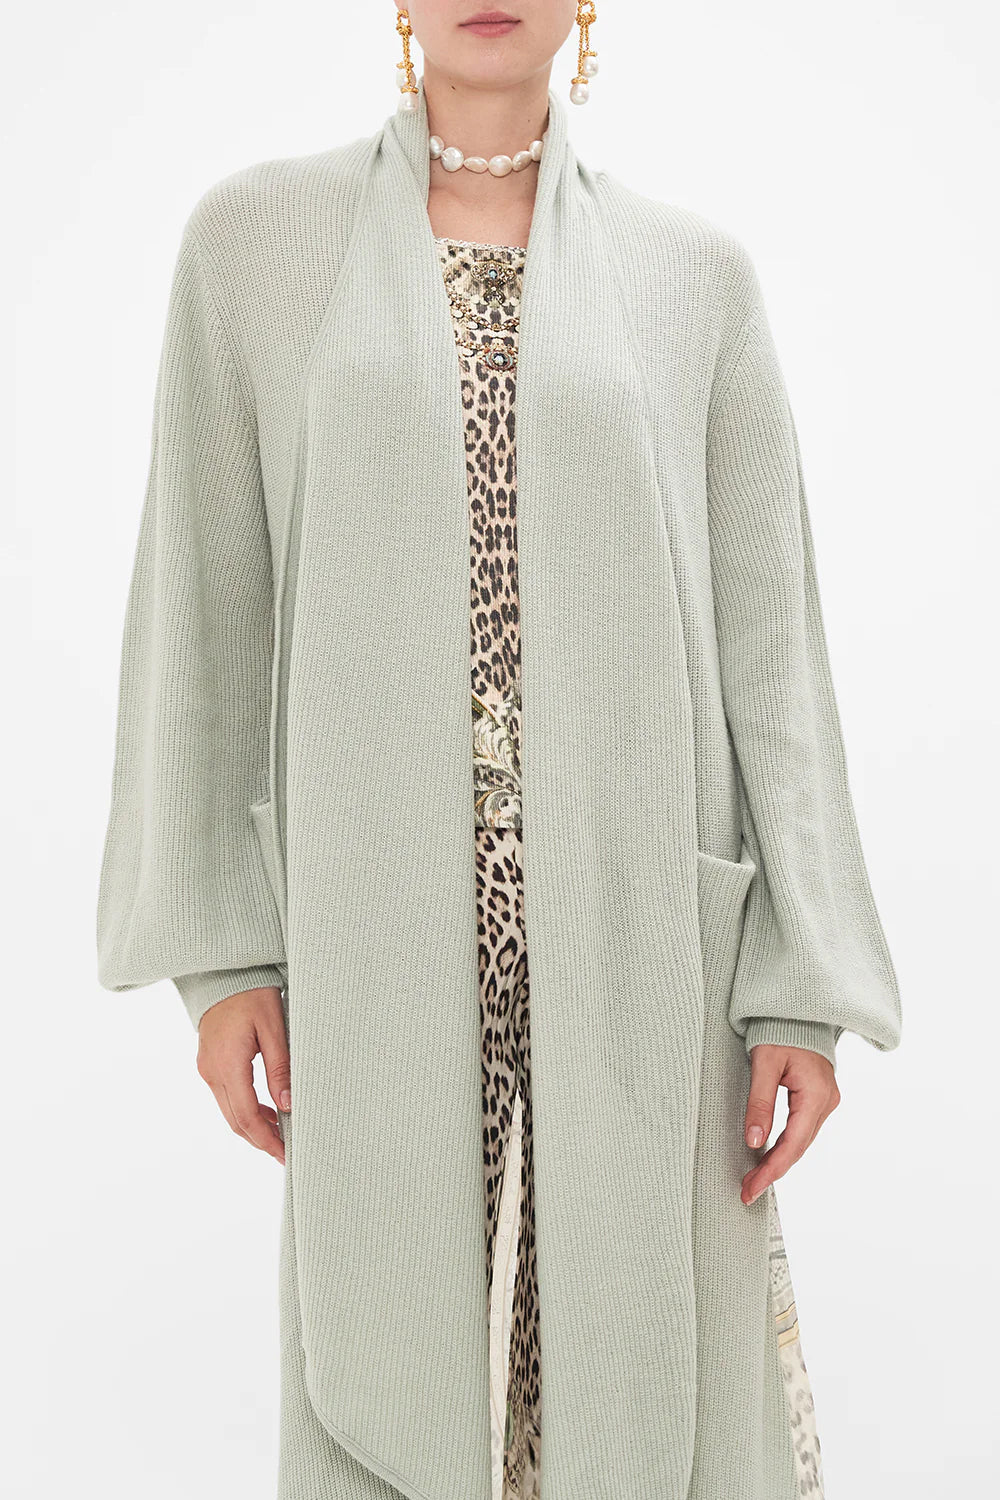 CAMILLA - Wool Cashmere Knit Layer With Silk Back Looking Glass Houses - Magpie Style